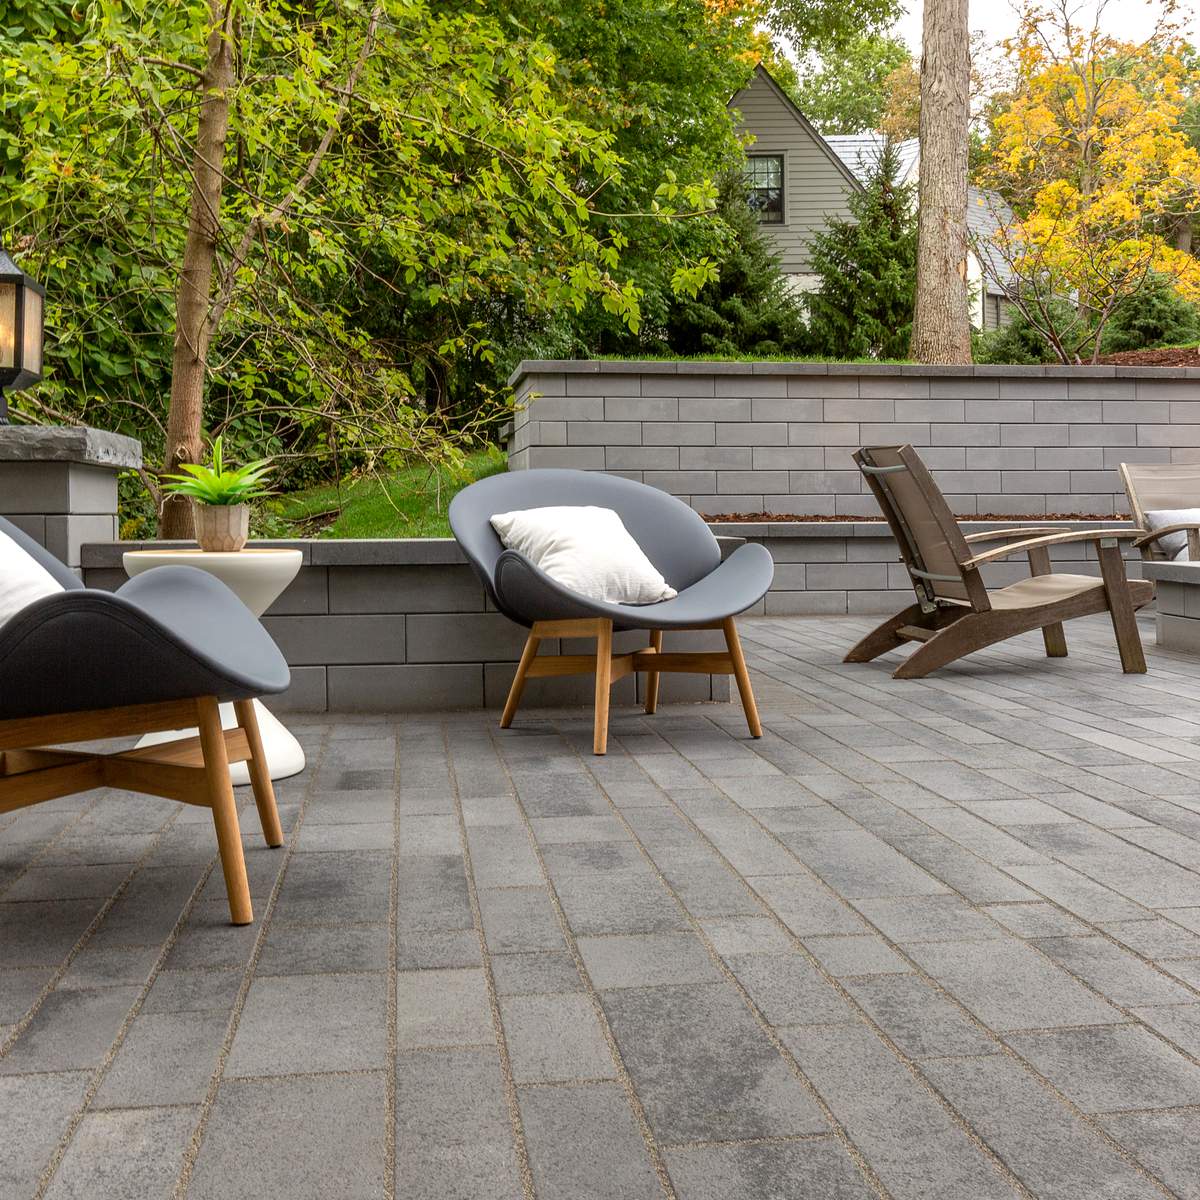 A patio with concrete pavers and a tree in the background.